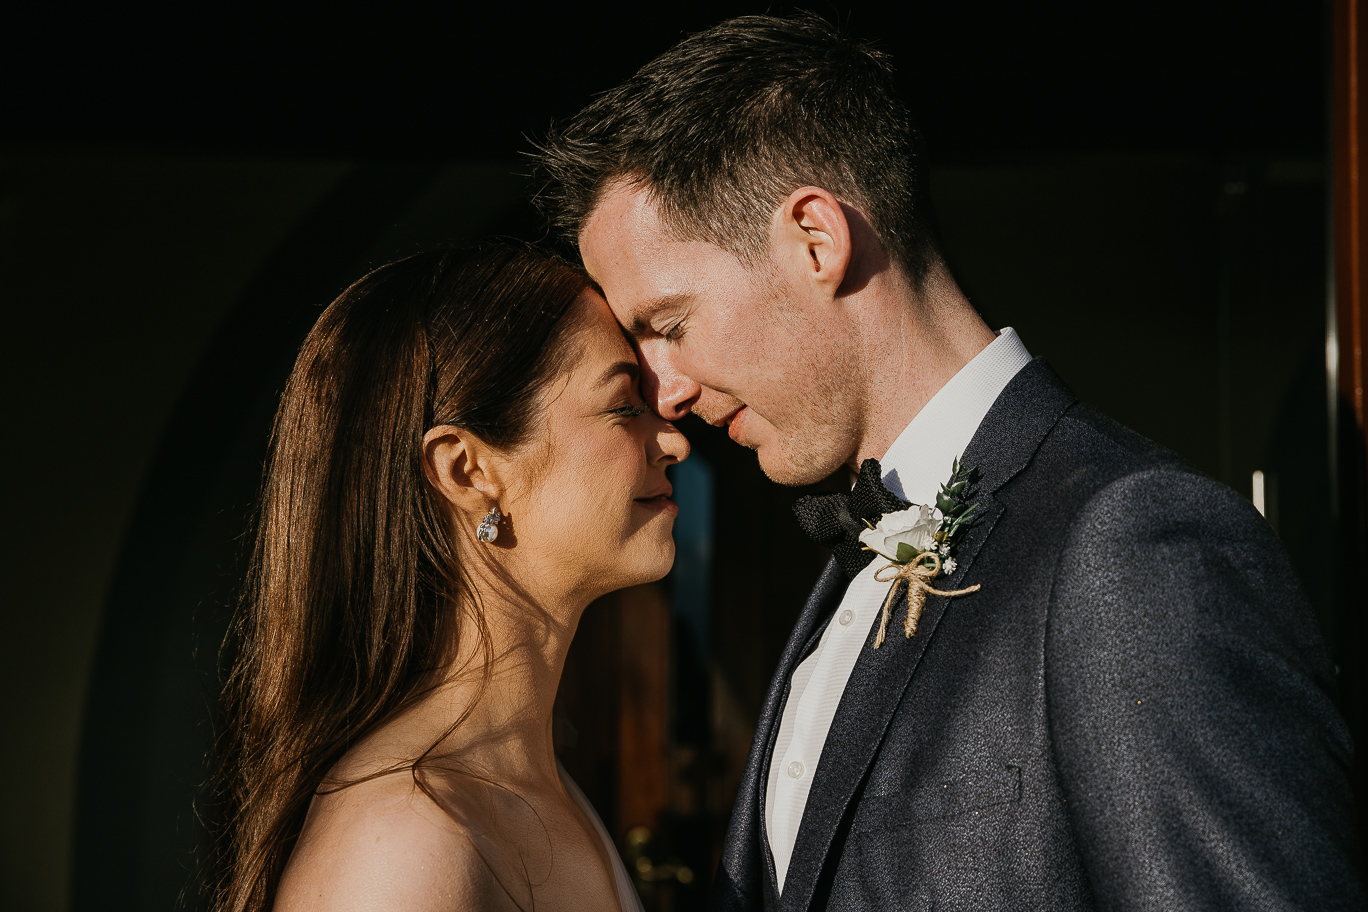 Wedding photographer in Ireland price lists and packages